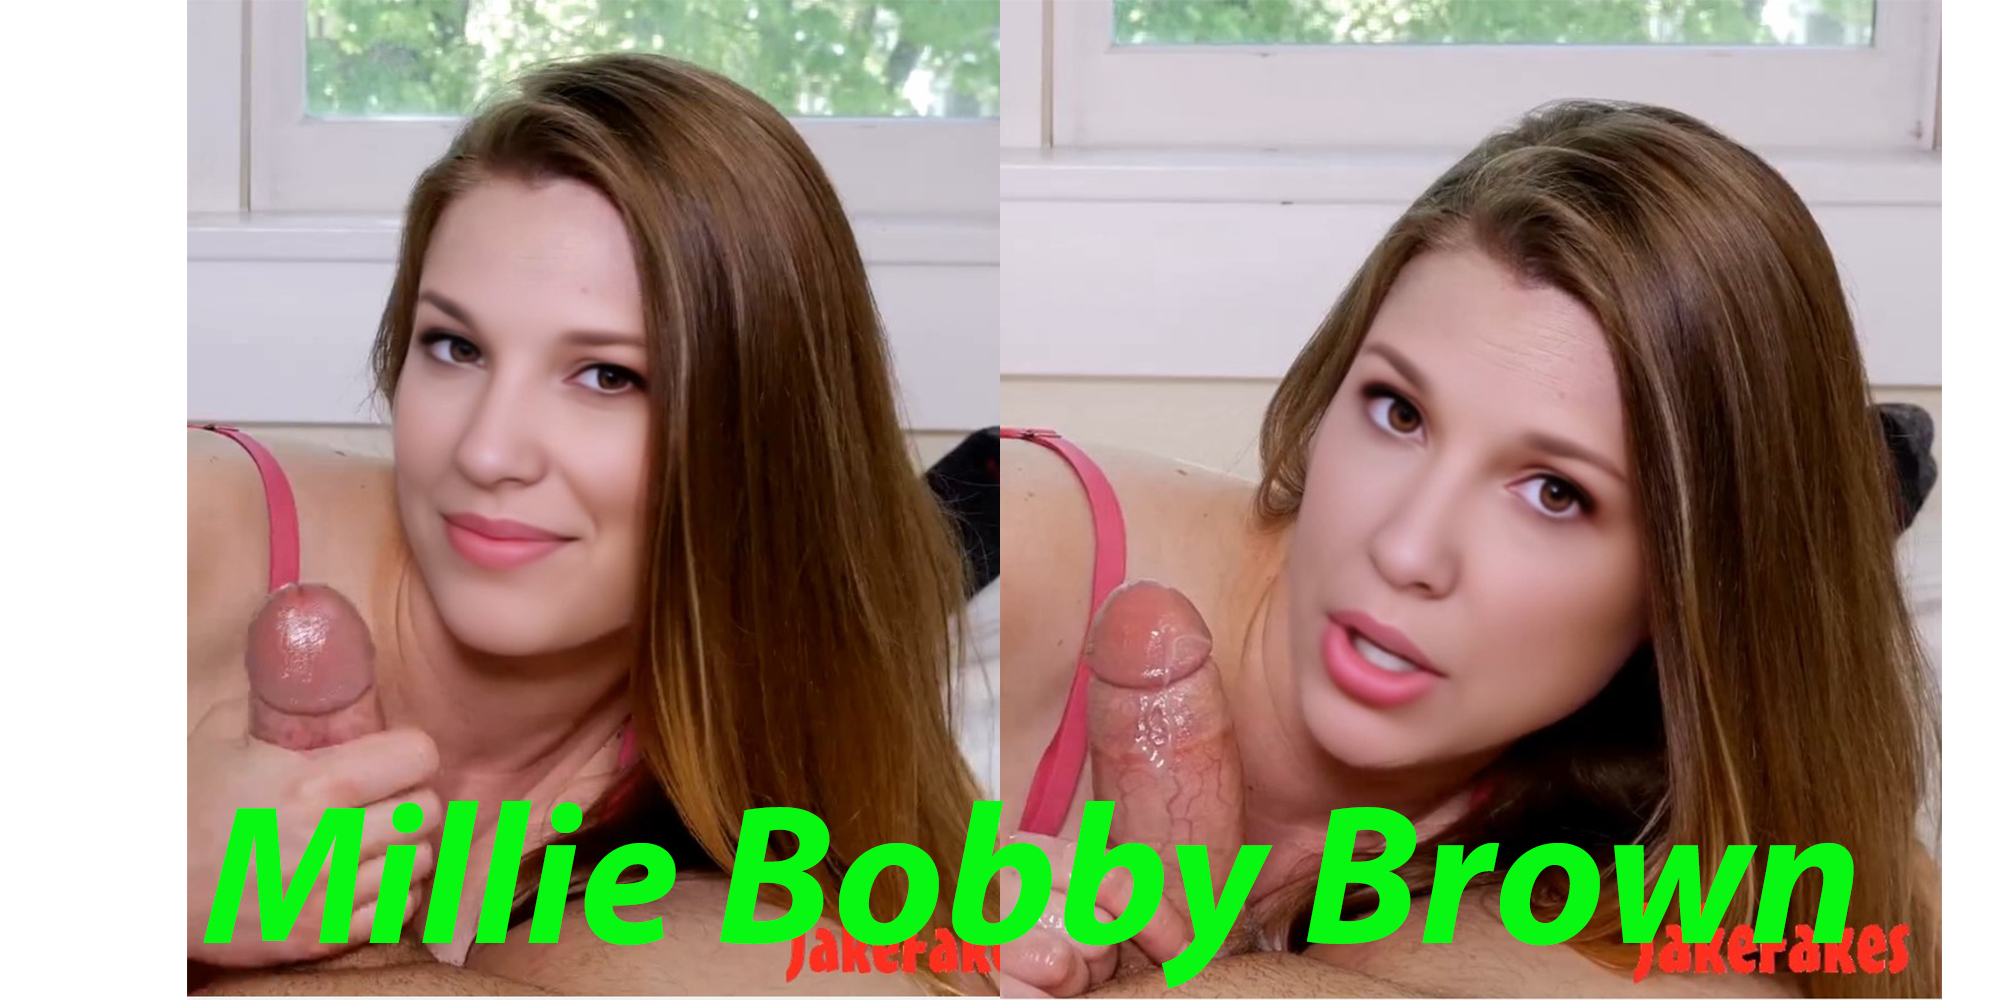 Millie Bobby Brown mommy takes care